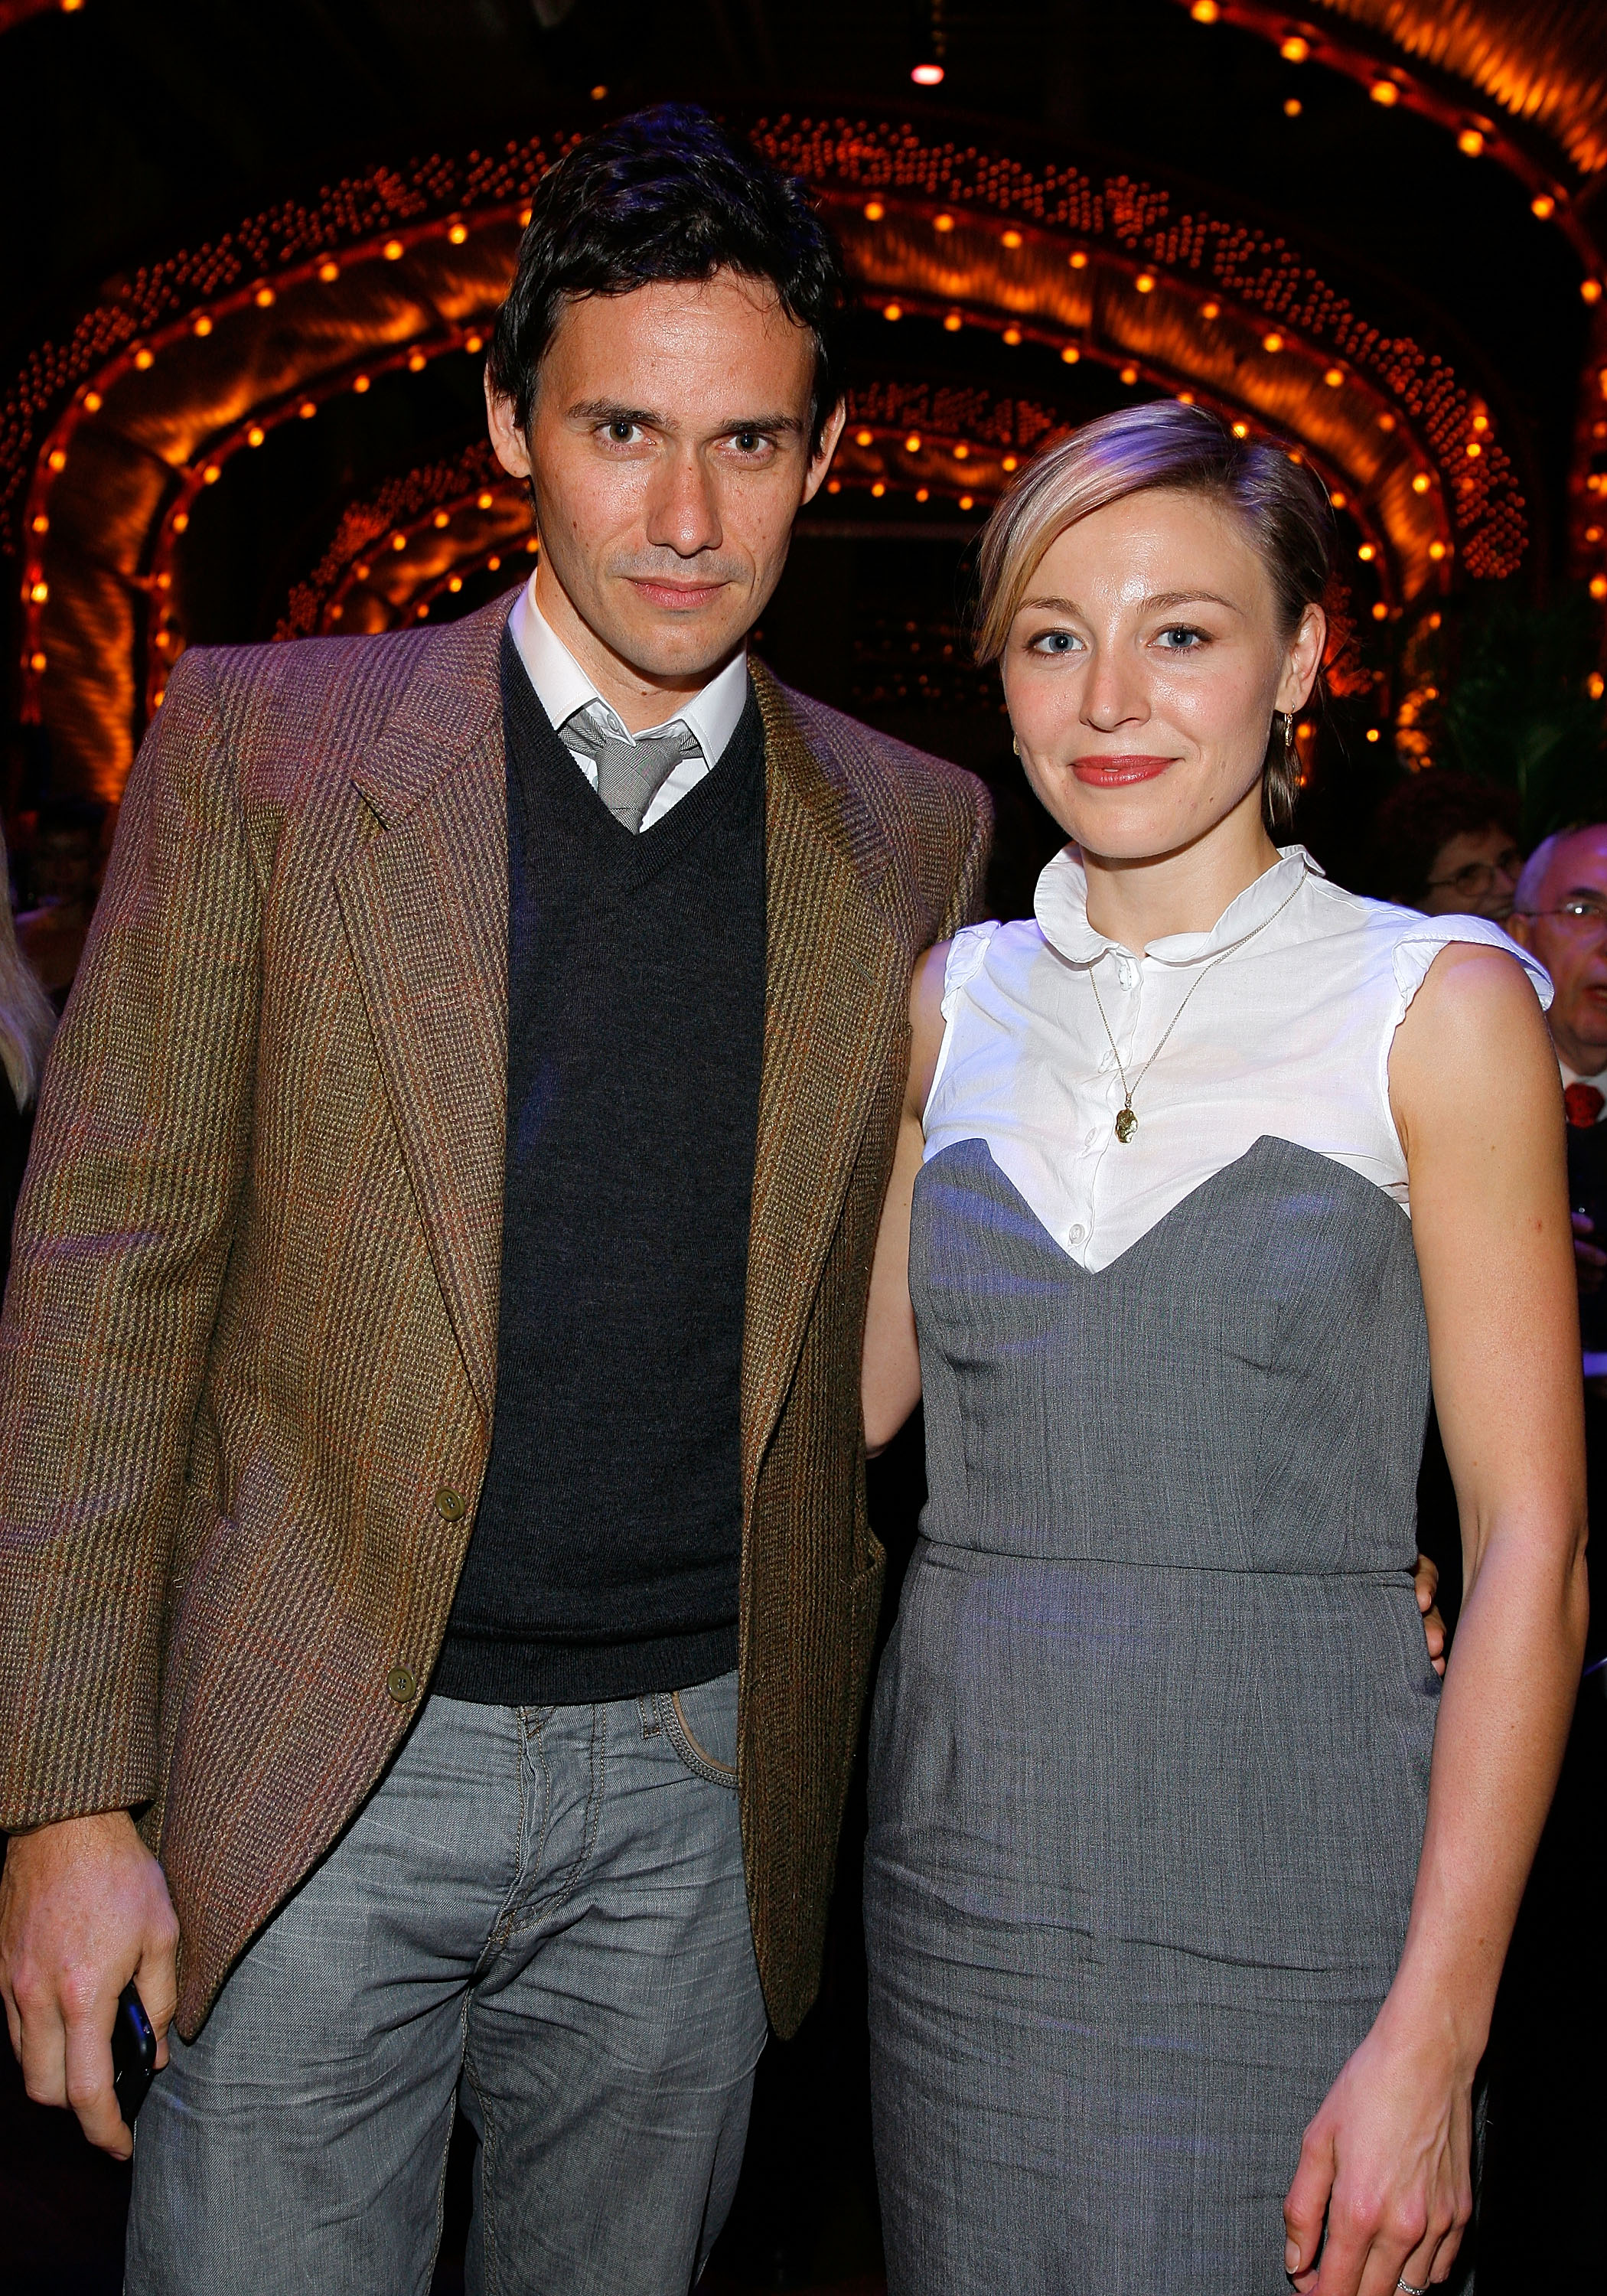 Christian Camargo and Juliet Rylance attend a screening of "The Tempest" at BAM Rose Cinemas on October 17, 2010, in Brooklyn, New York City | Source: Getty Images